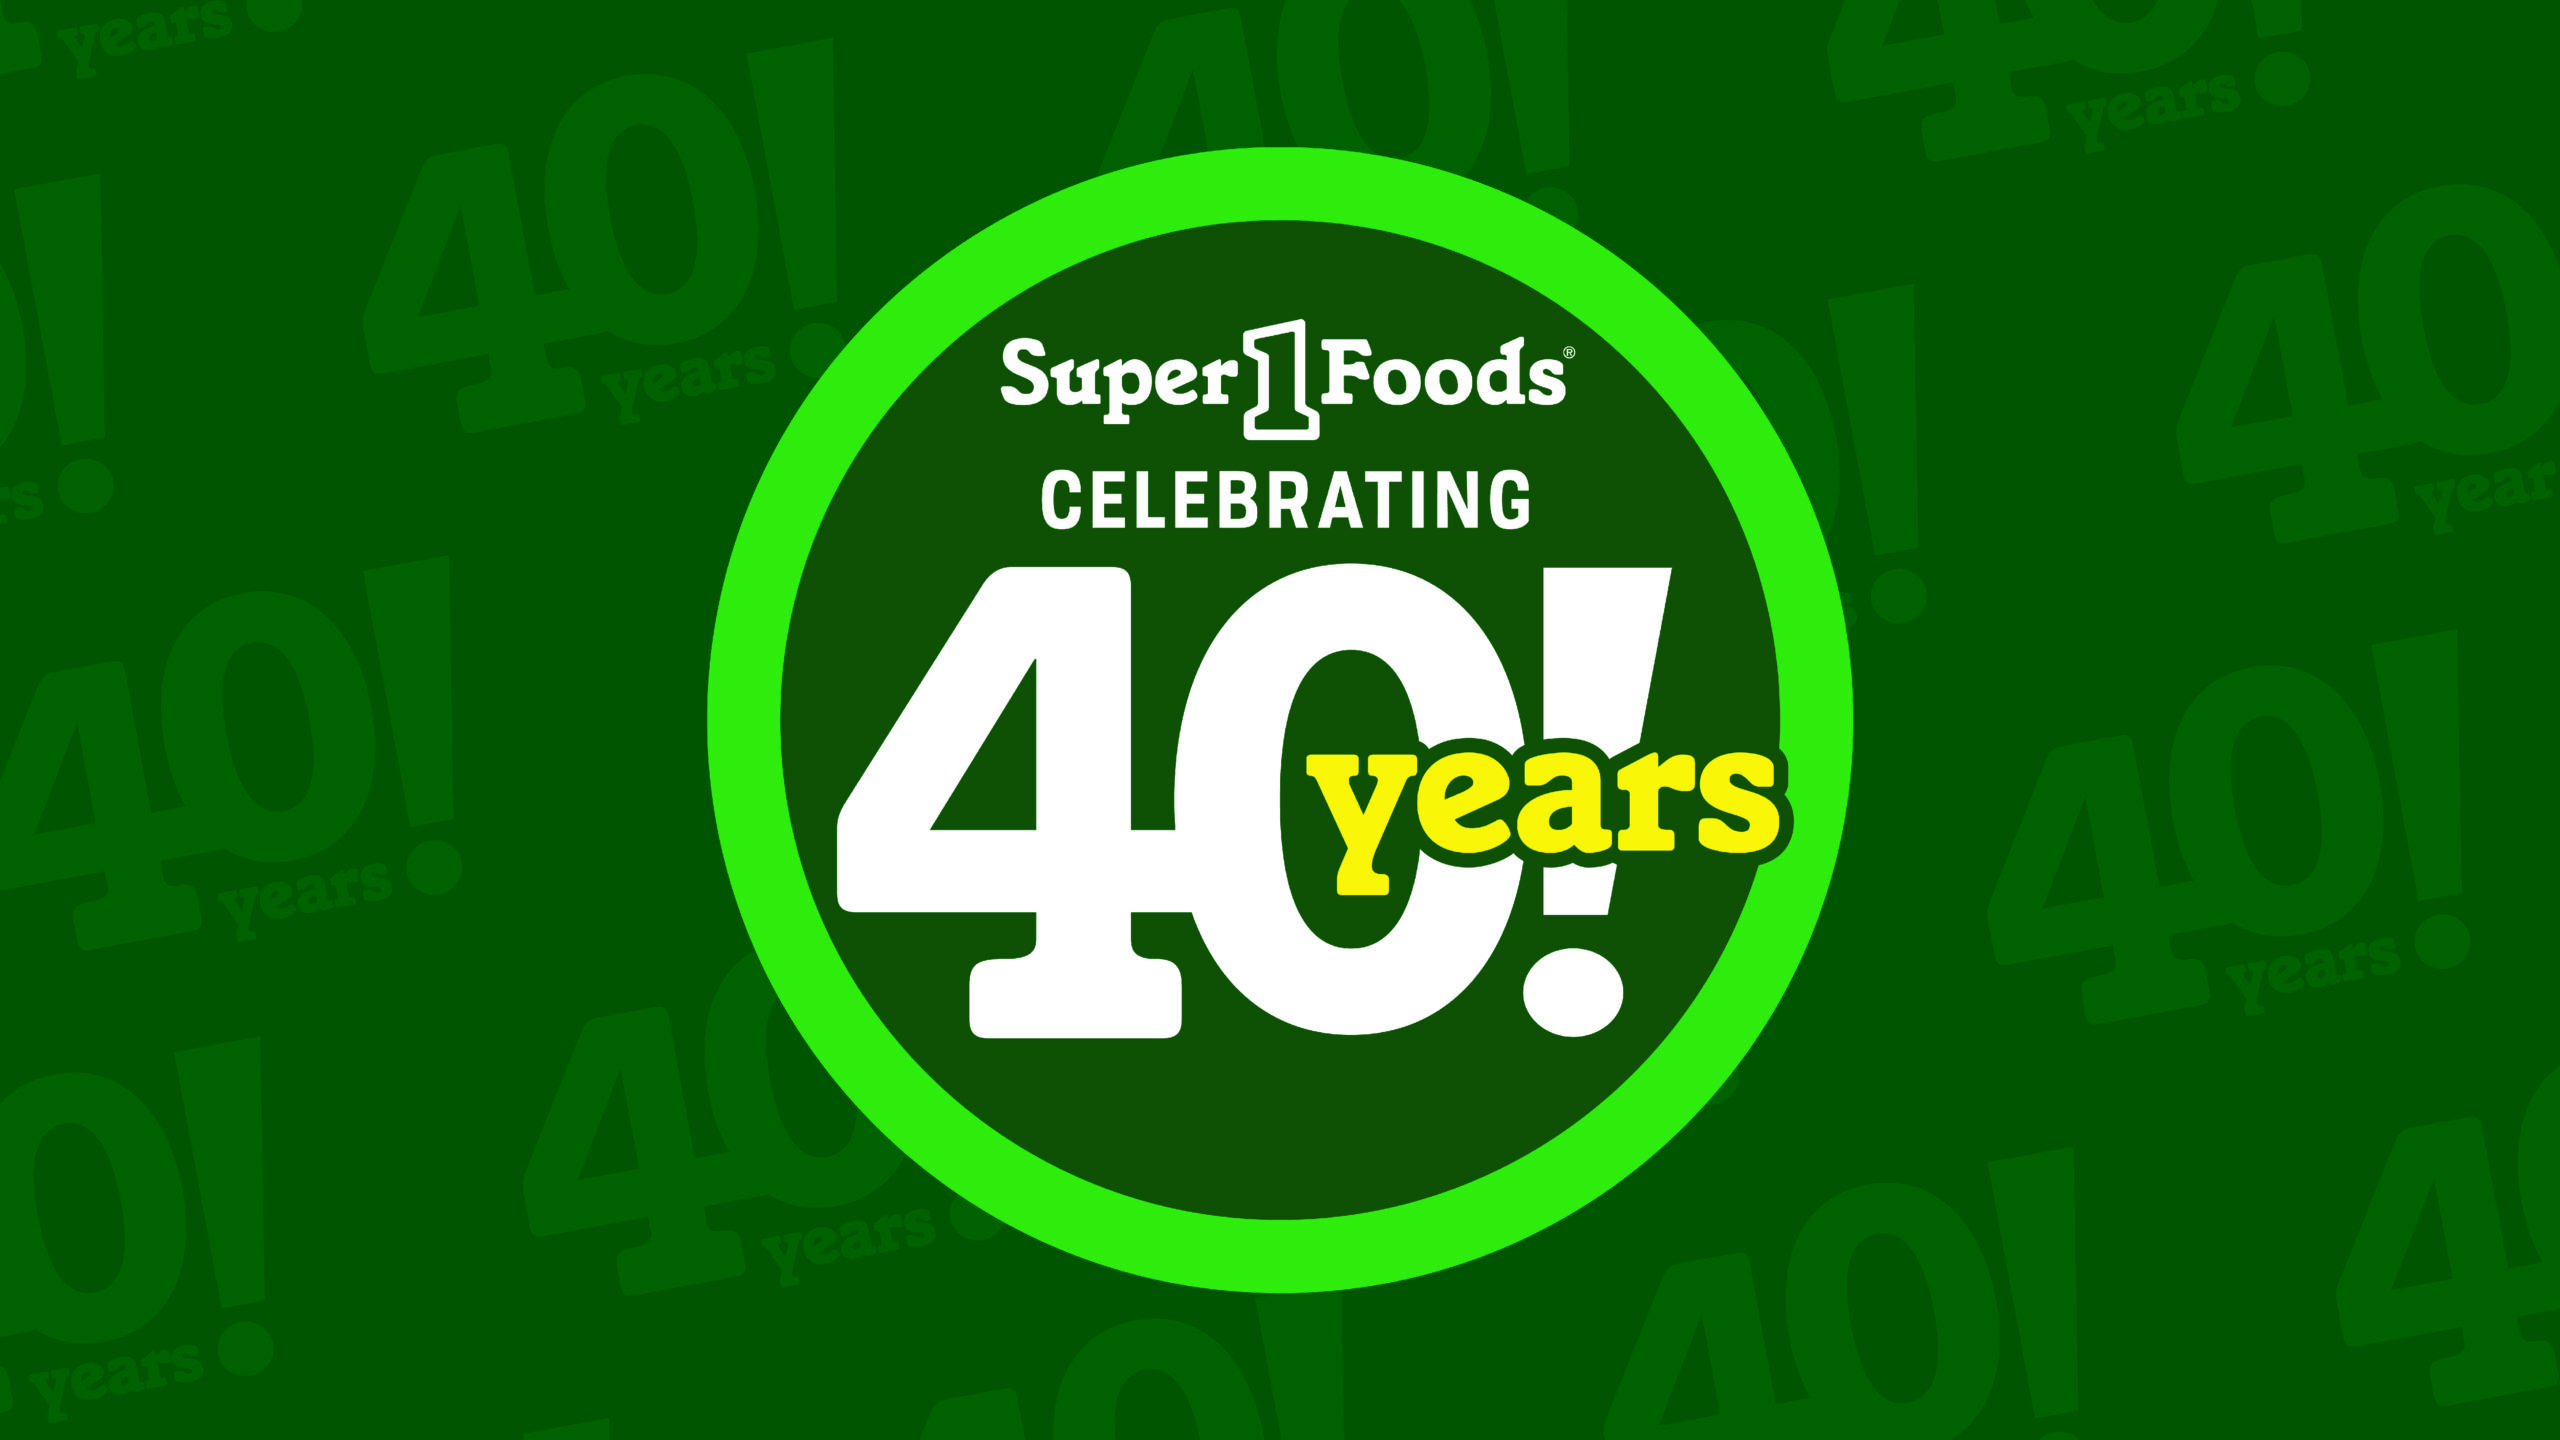 Brookshire Grocery Co. Celebrates Super 1 Foods 40th Anniversary